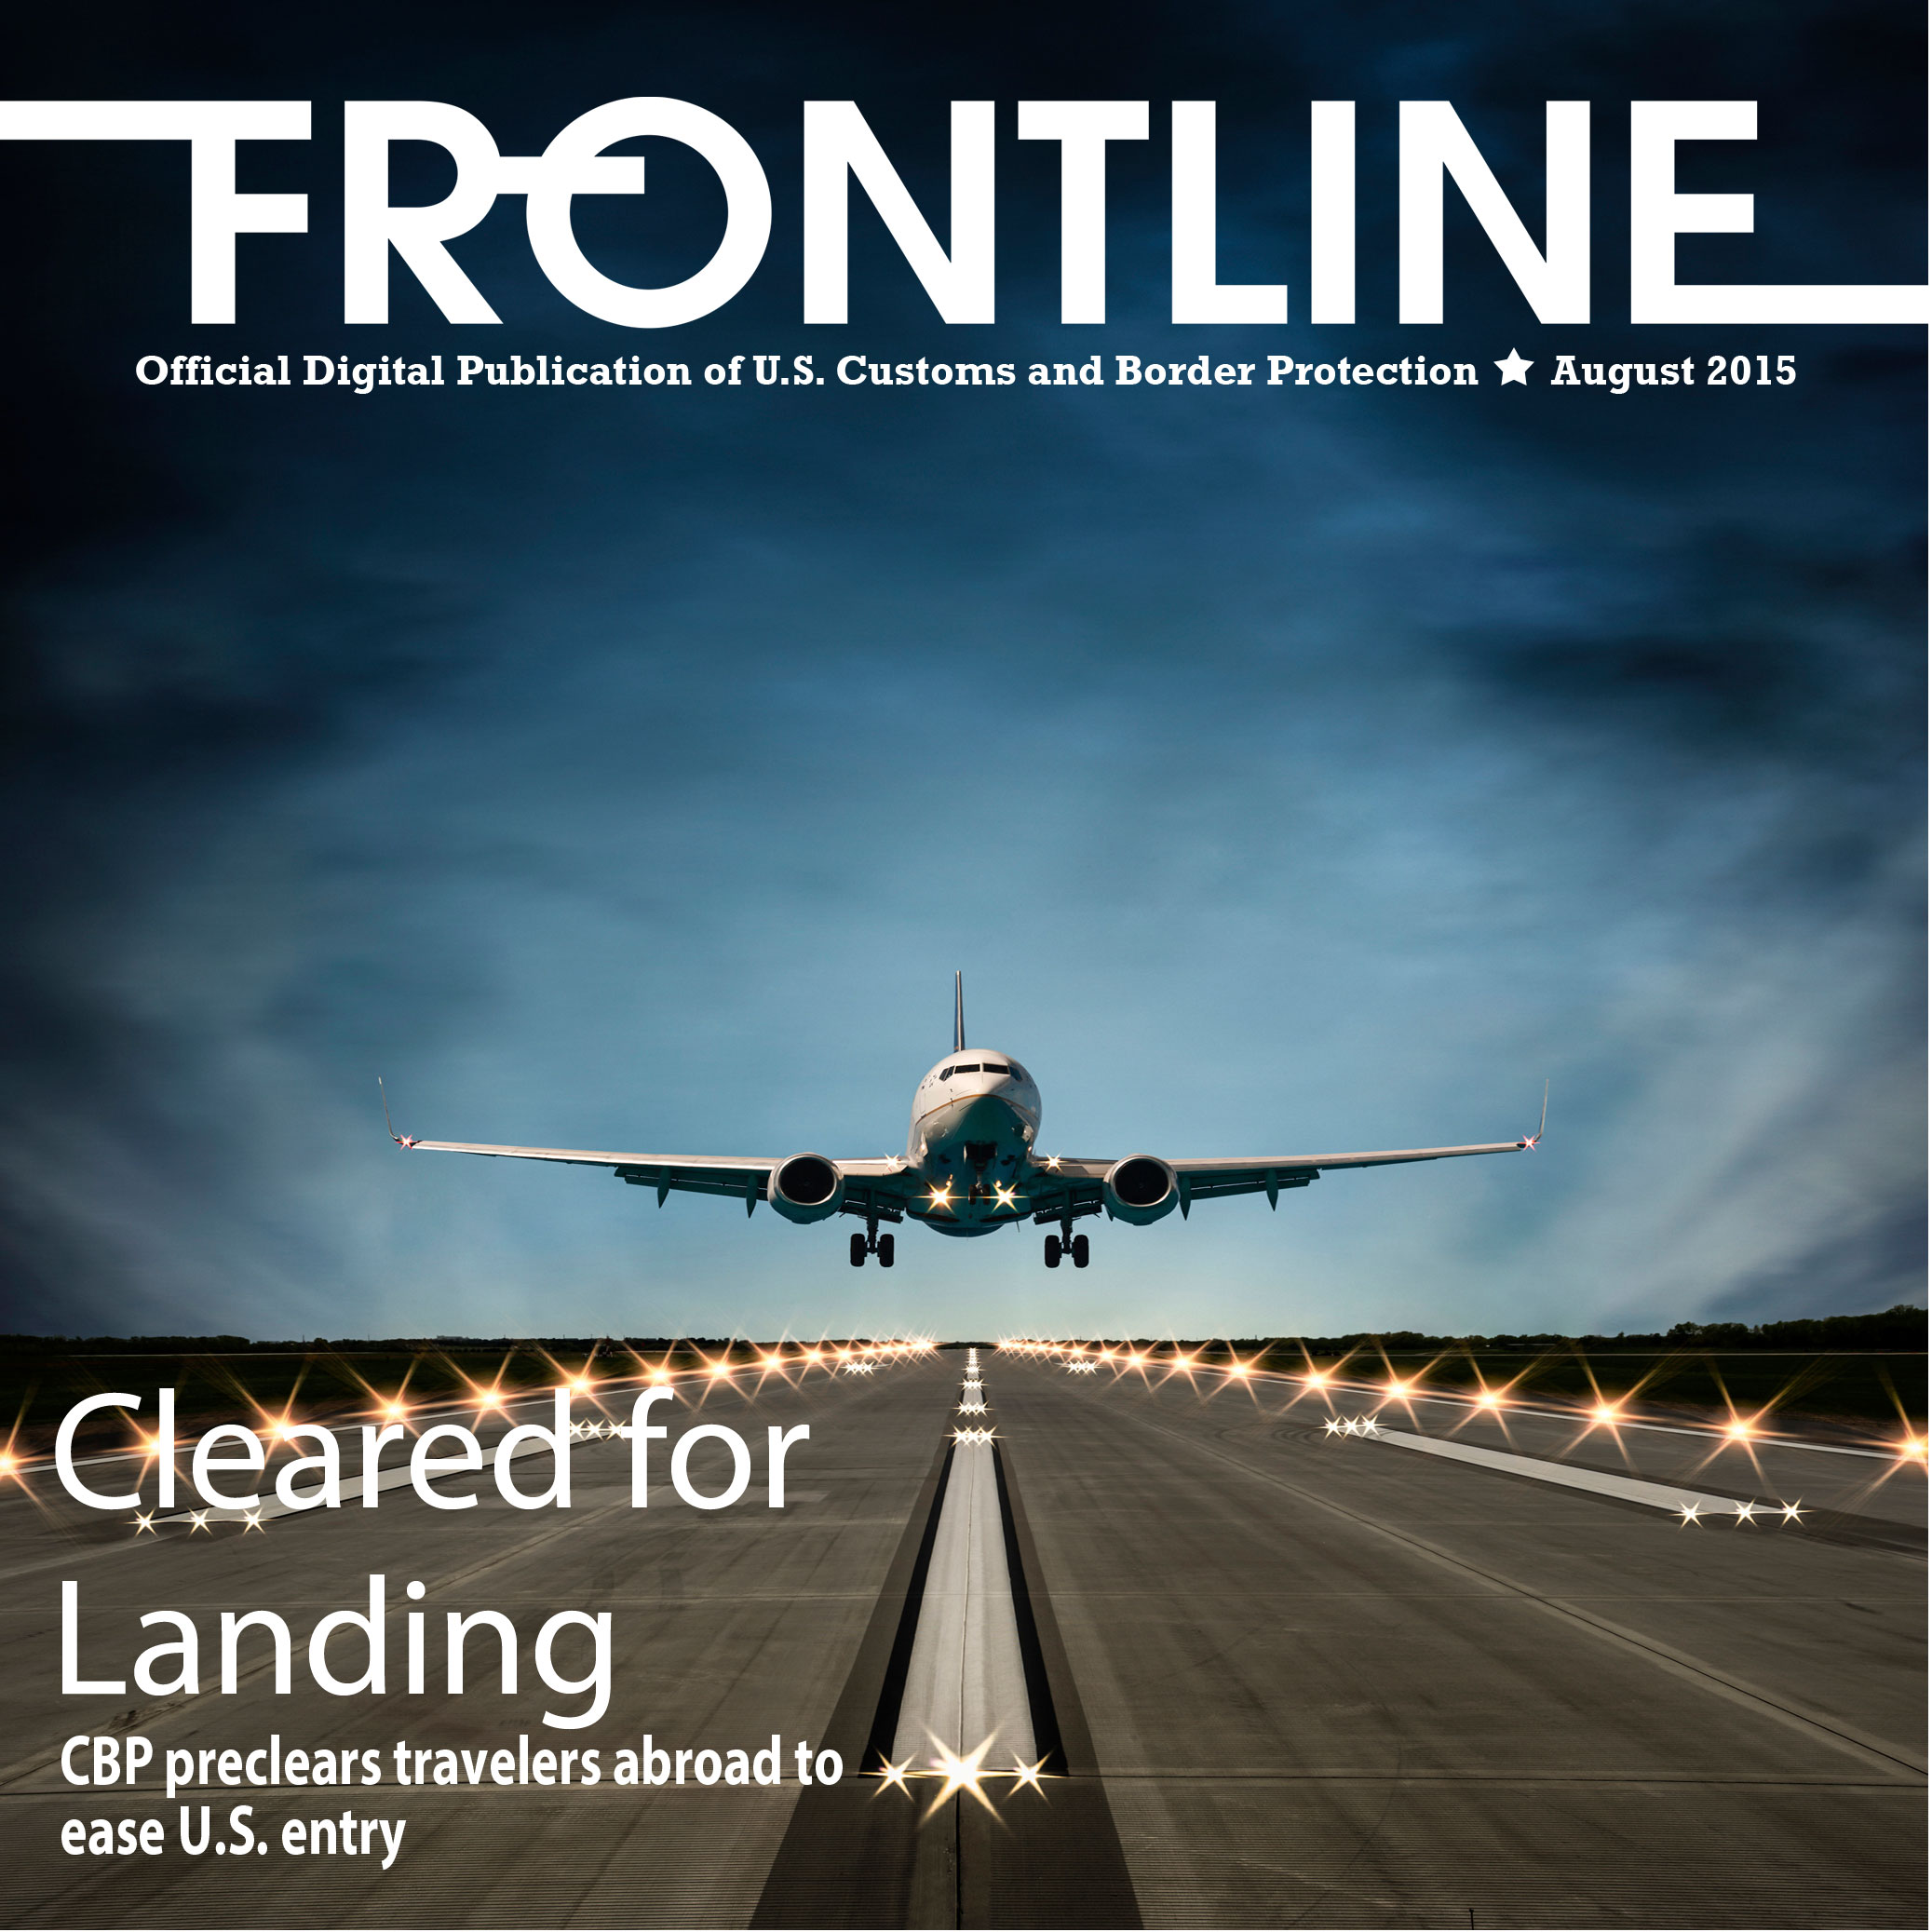 Cover image of a plane landing with text saying, "Cleared for Landing"